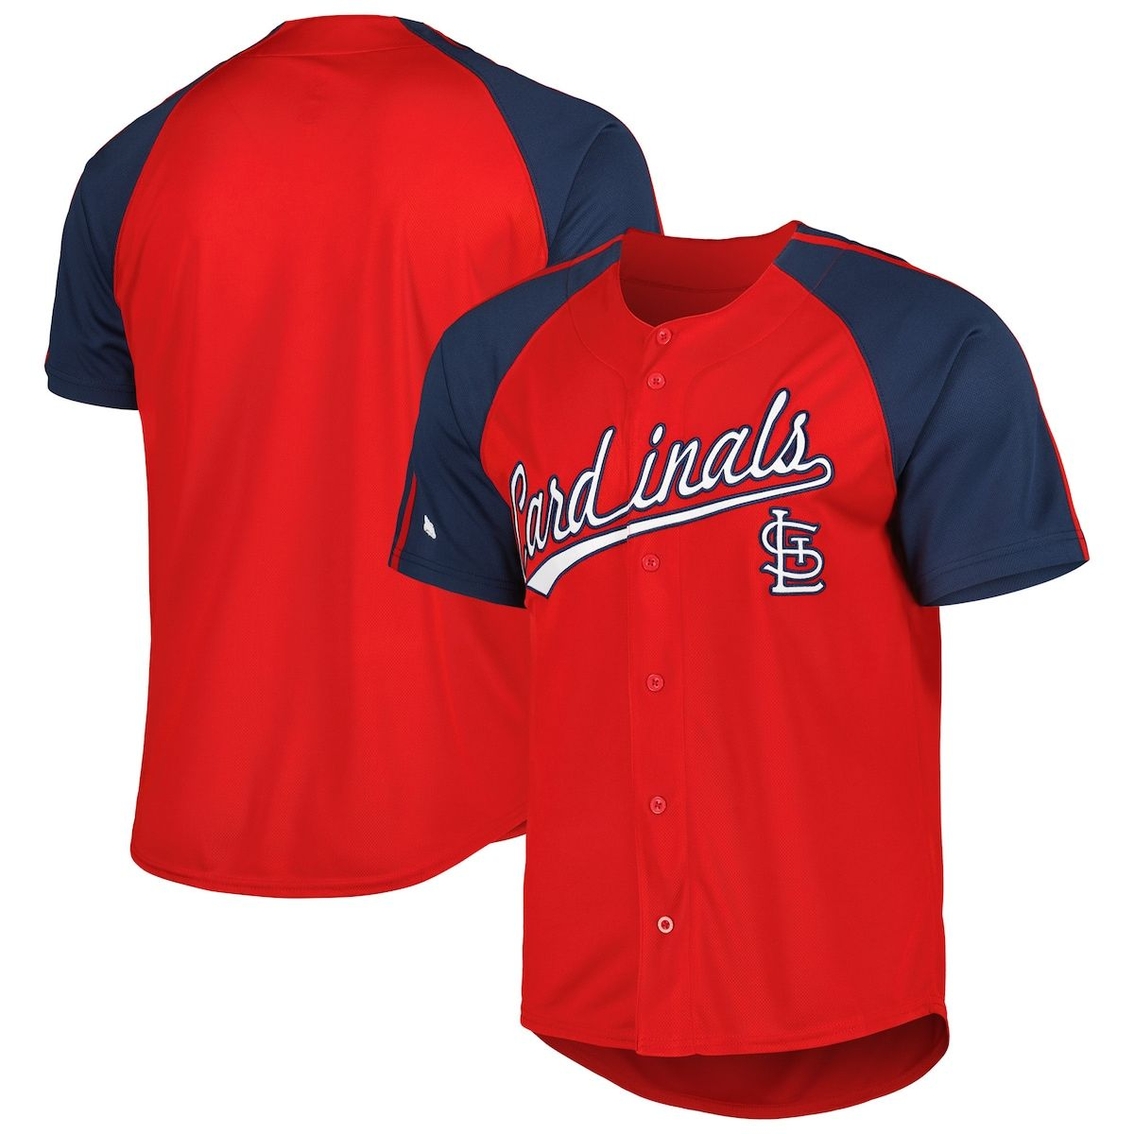 St. Louis Cardinals Stitches Youth T-Shirt Combo Set - Red/White